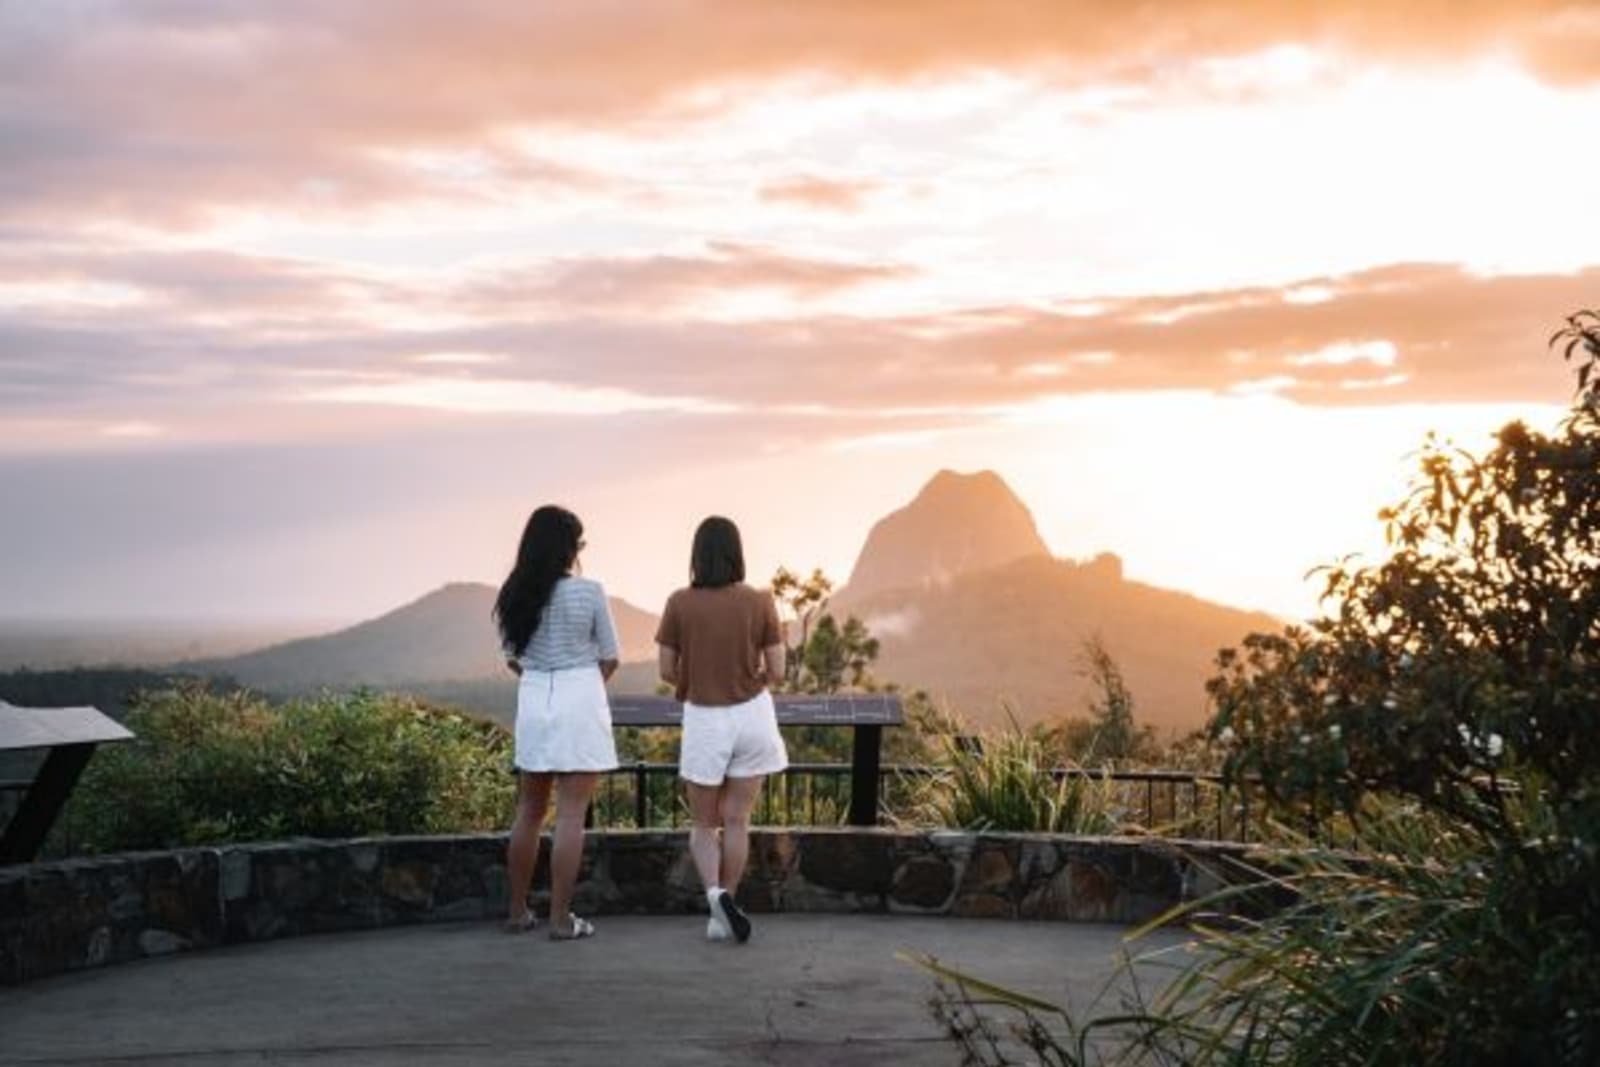 Two females looking at sunset on mountain lookout